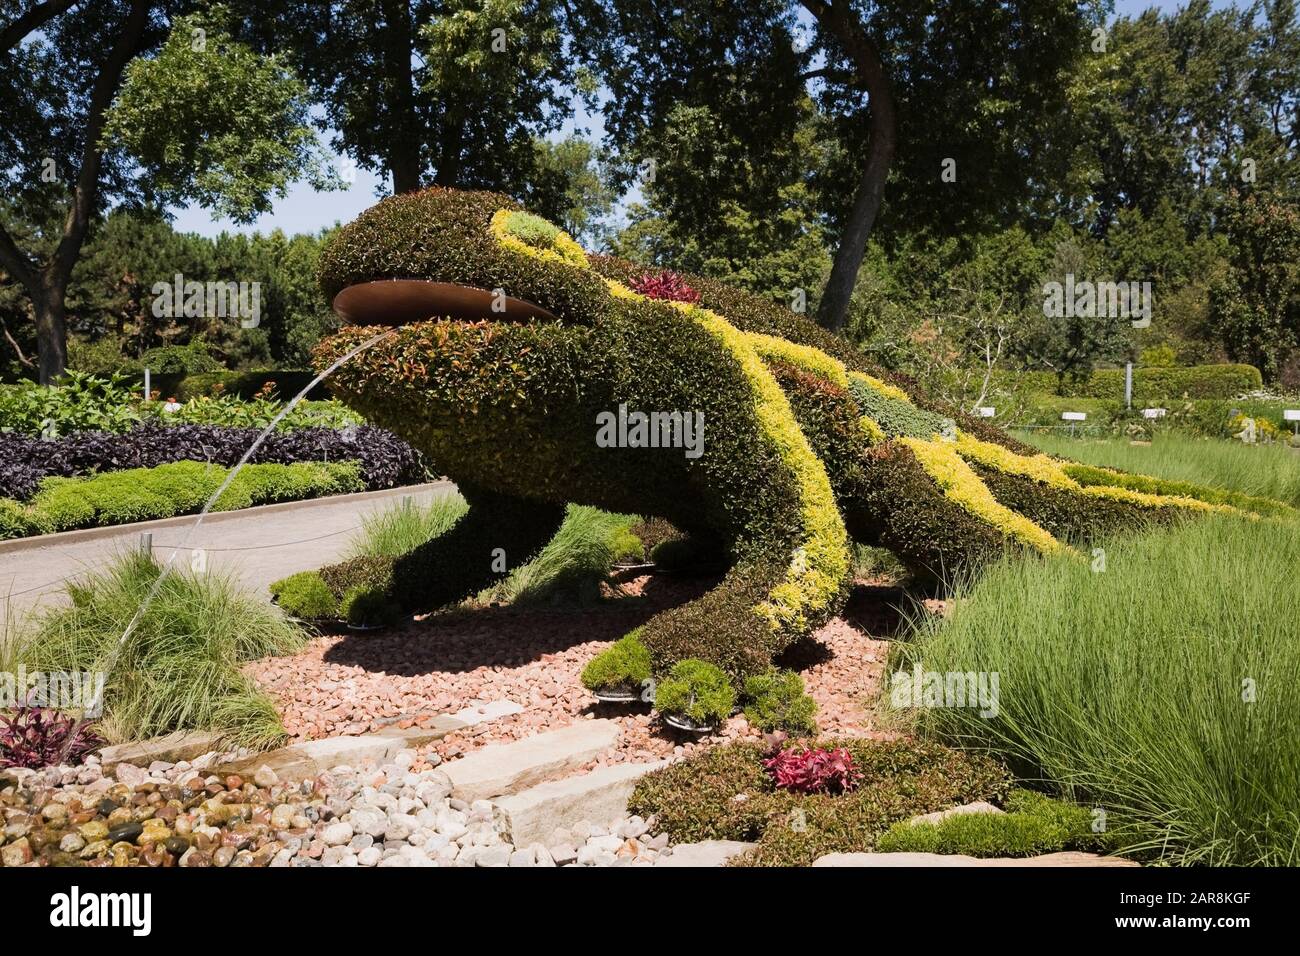 Living plant sculpture in summer called 'The Salamander According to Gaudi' created on metal mesh forms filled with earth and various plants Stock Photo